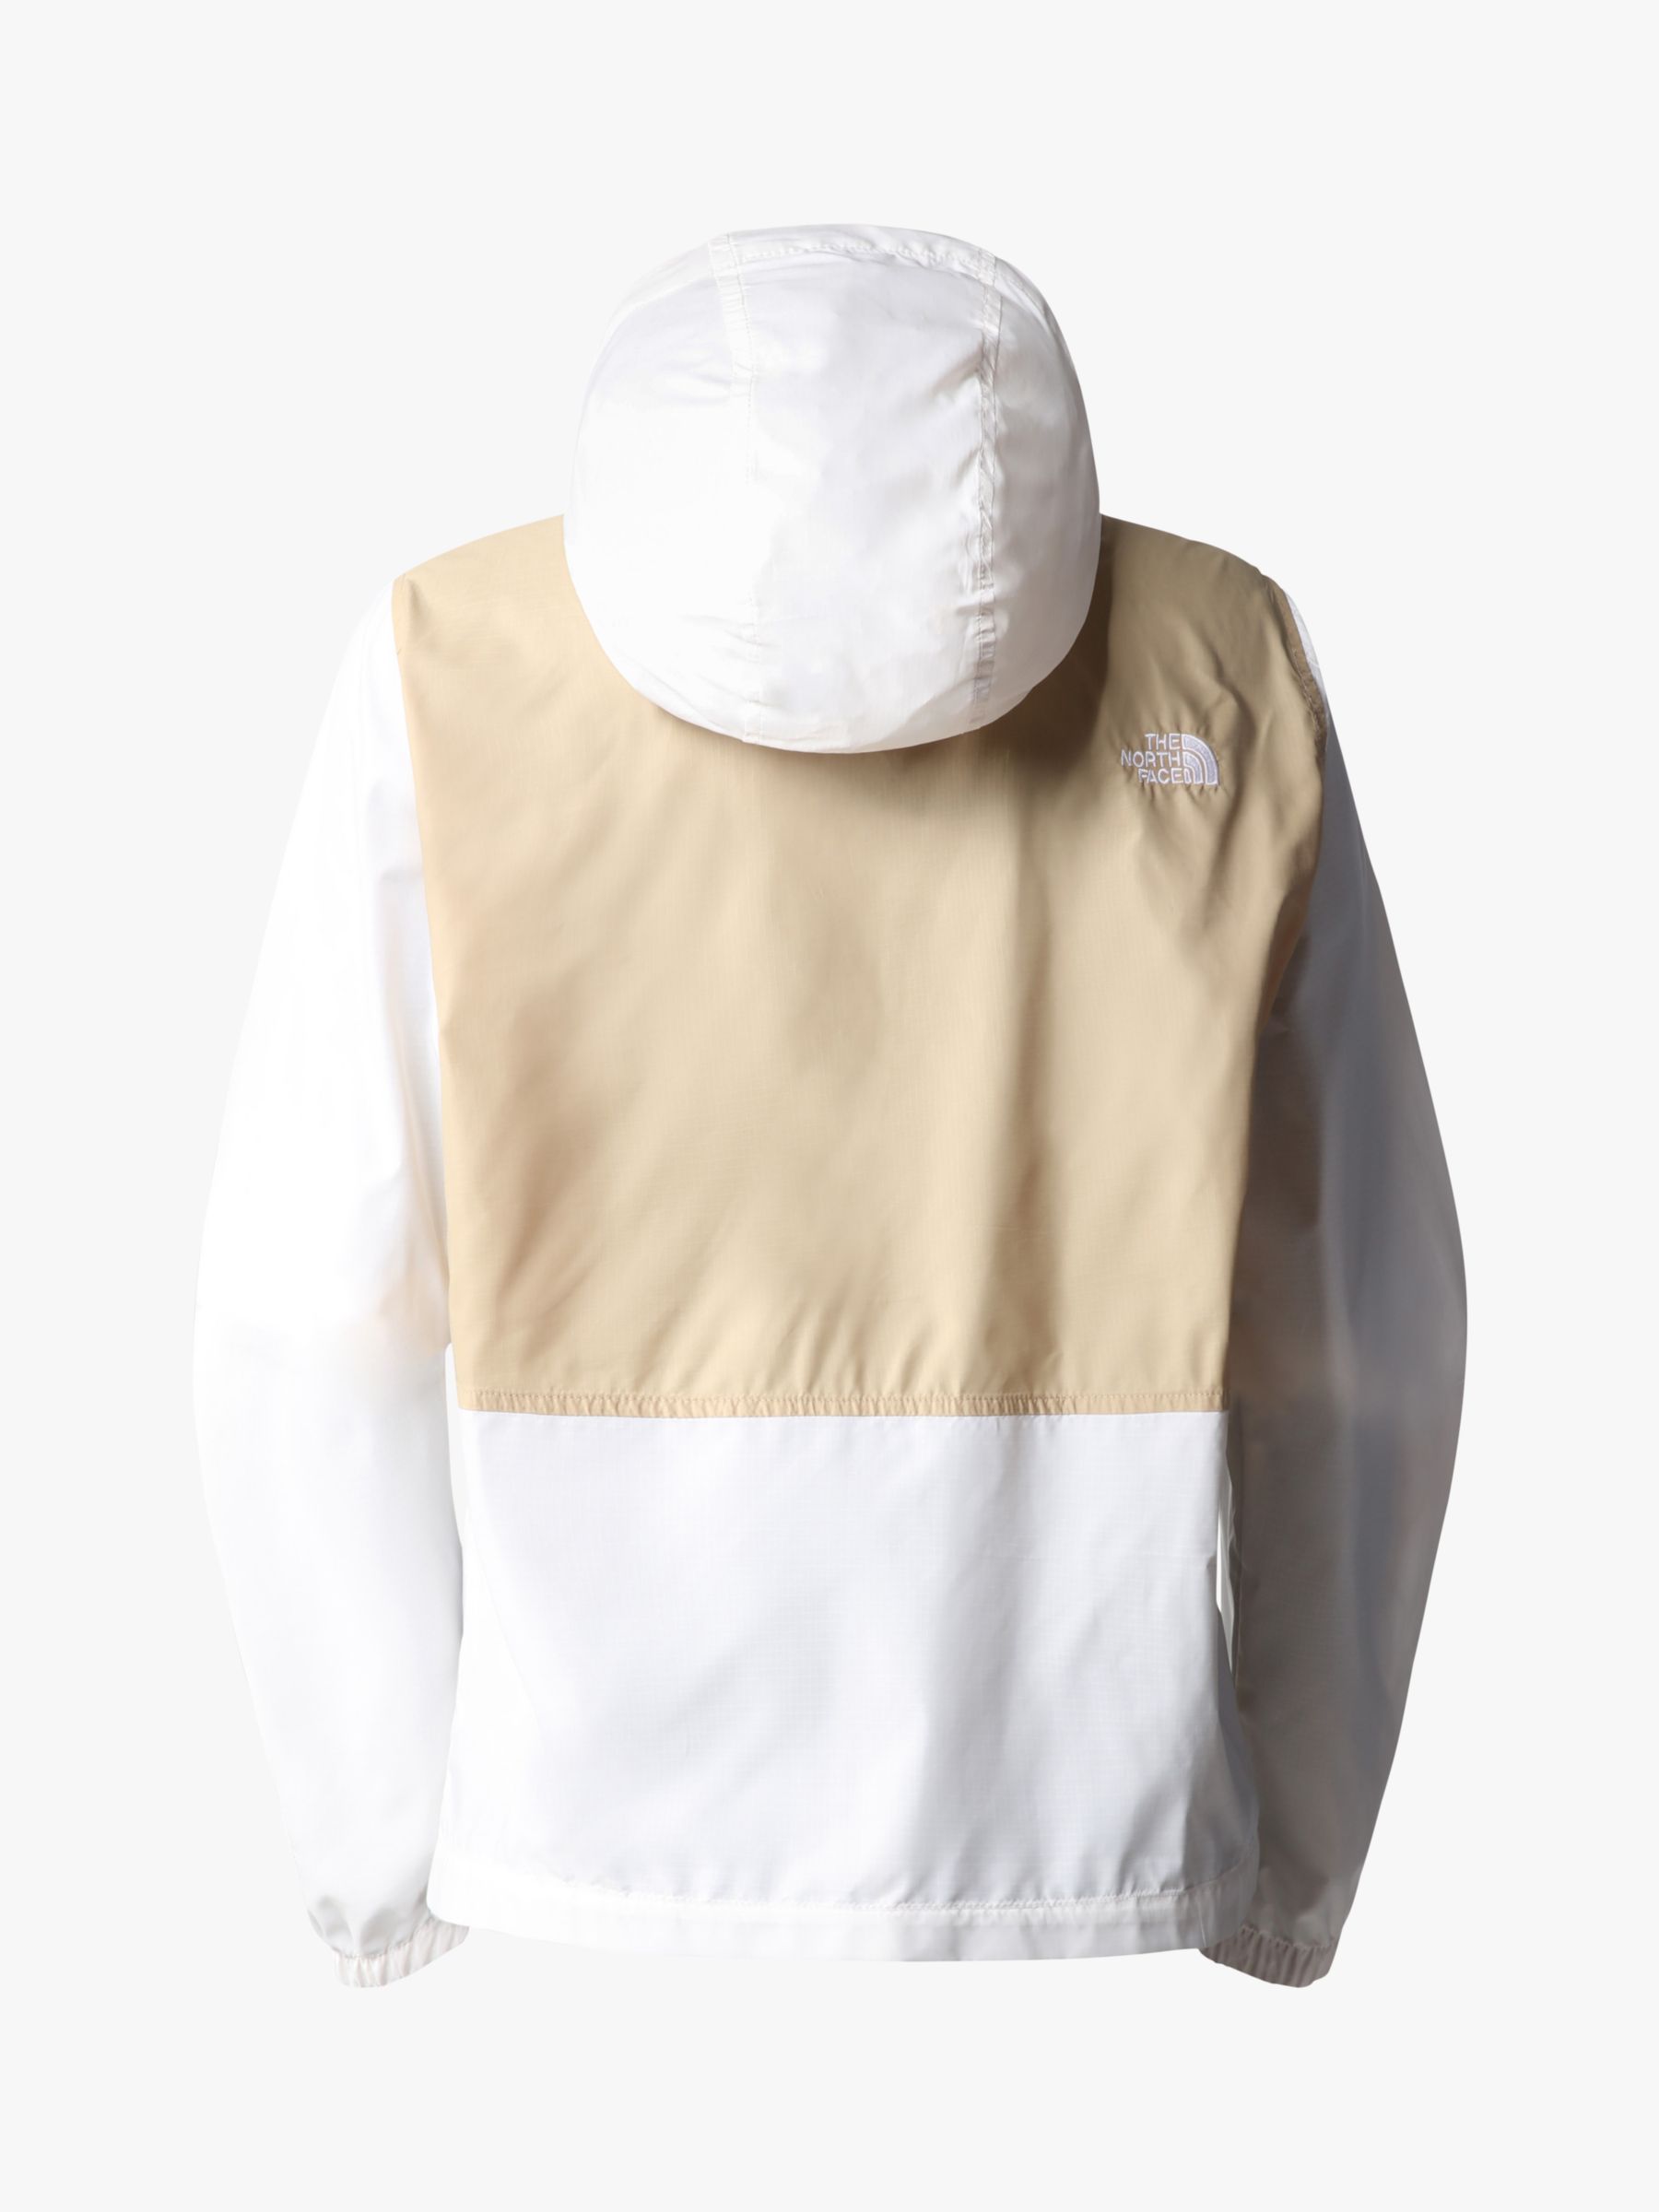 Buy The North Face Women's Cyclone III Jacket, White/ Stone Online at johnlewis.com